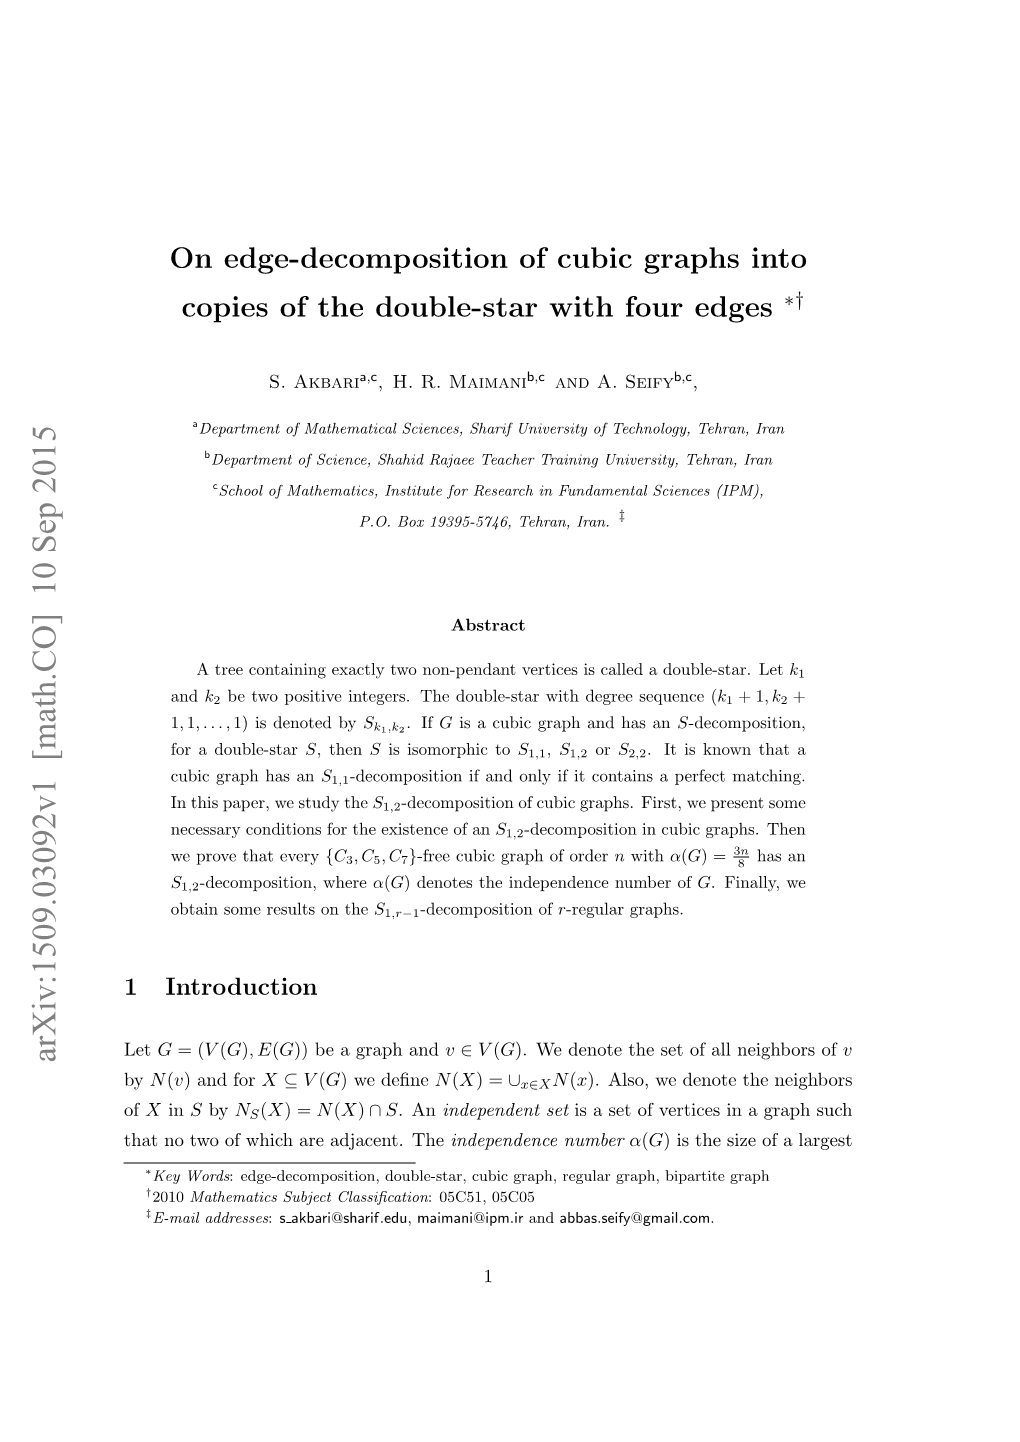 On Edge-Decomposition of Cubic Graphs Into Copies of the Double-Star with Four Edges ∗†